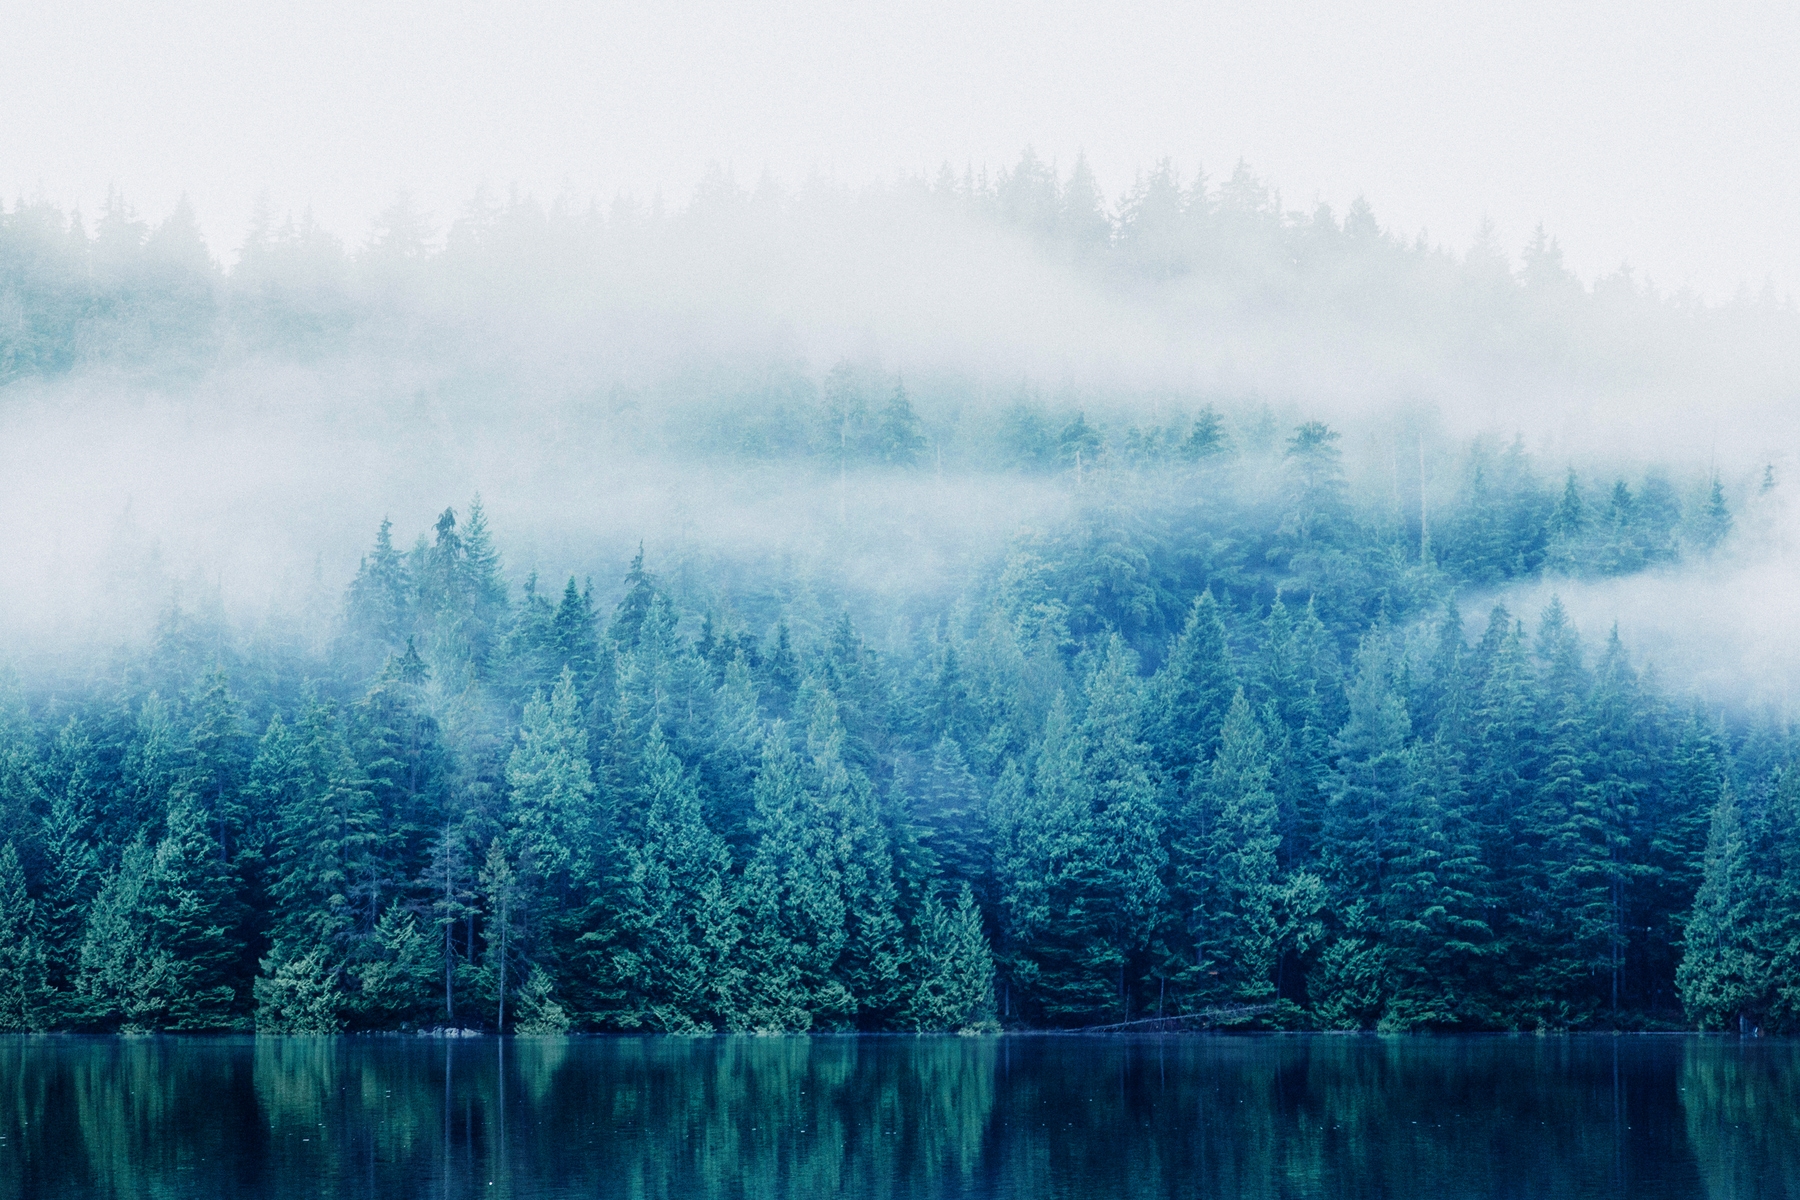 A foggy forest with a lake in the foreground. - Foggy forest